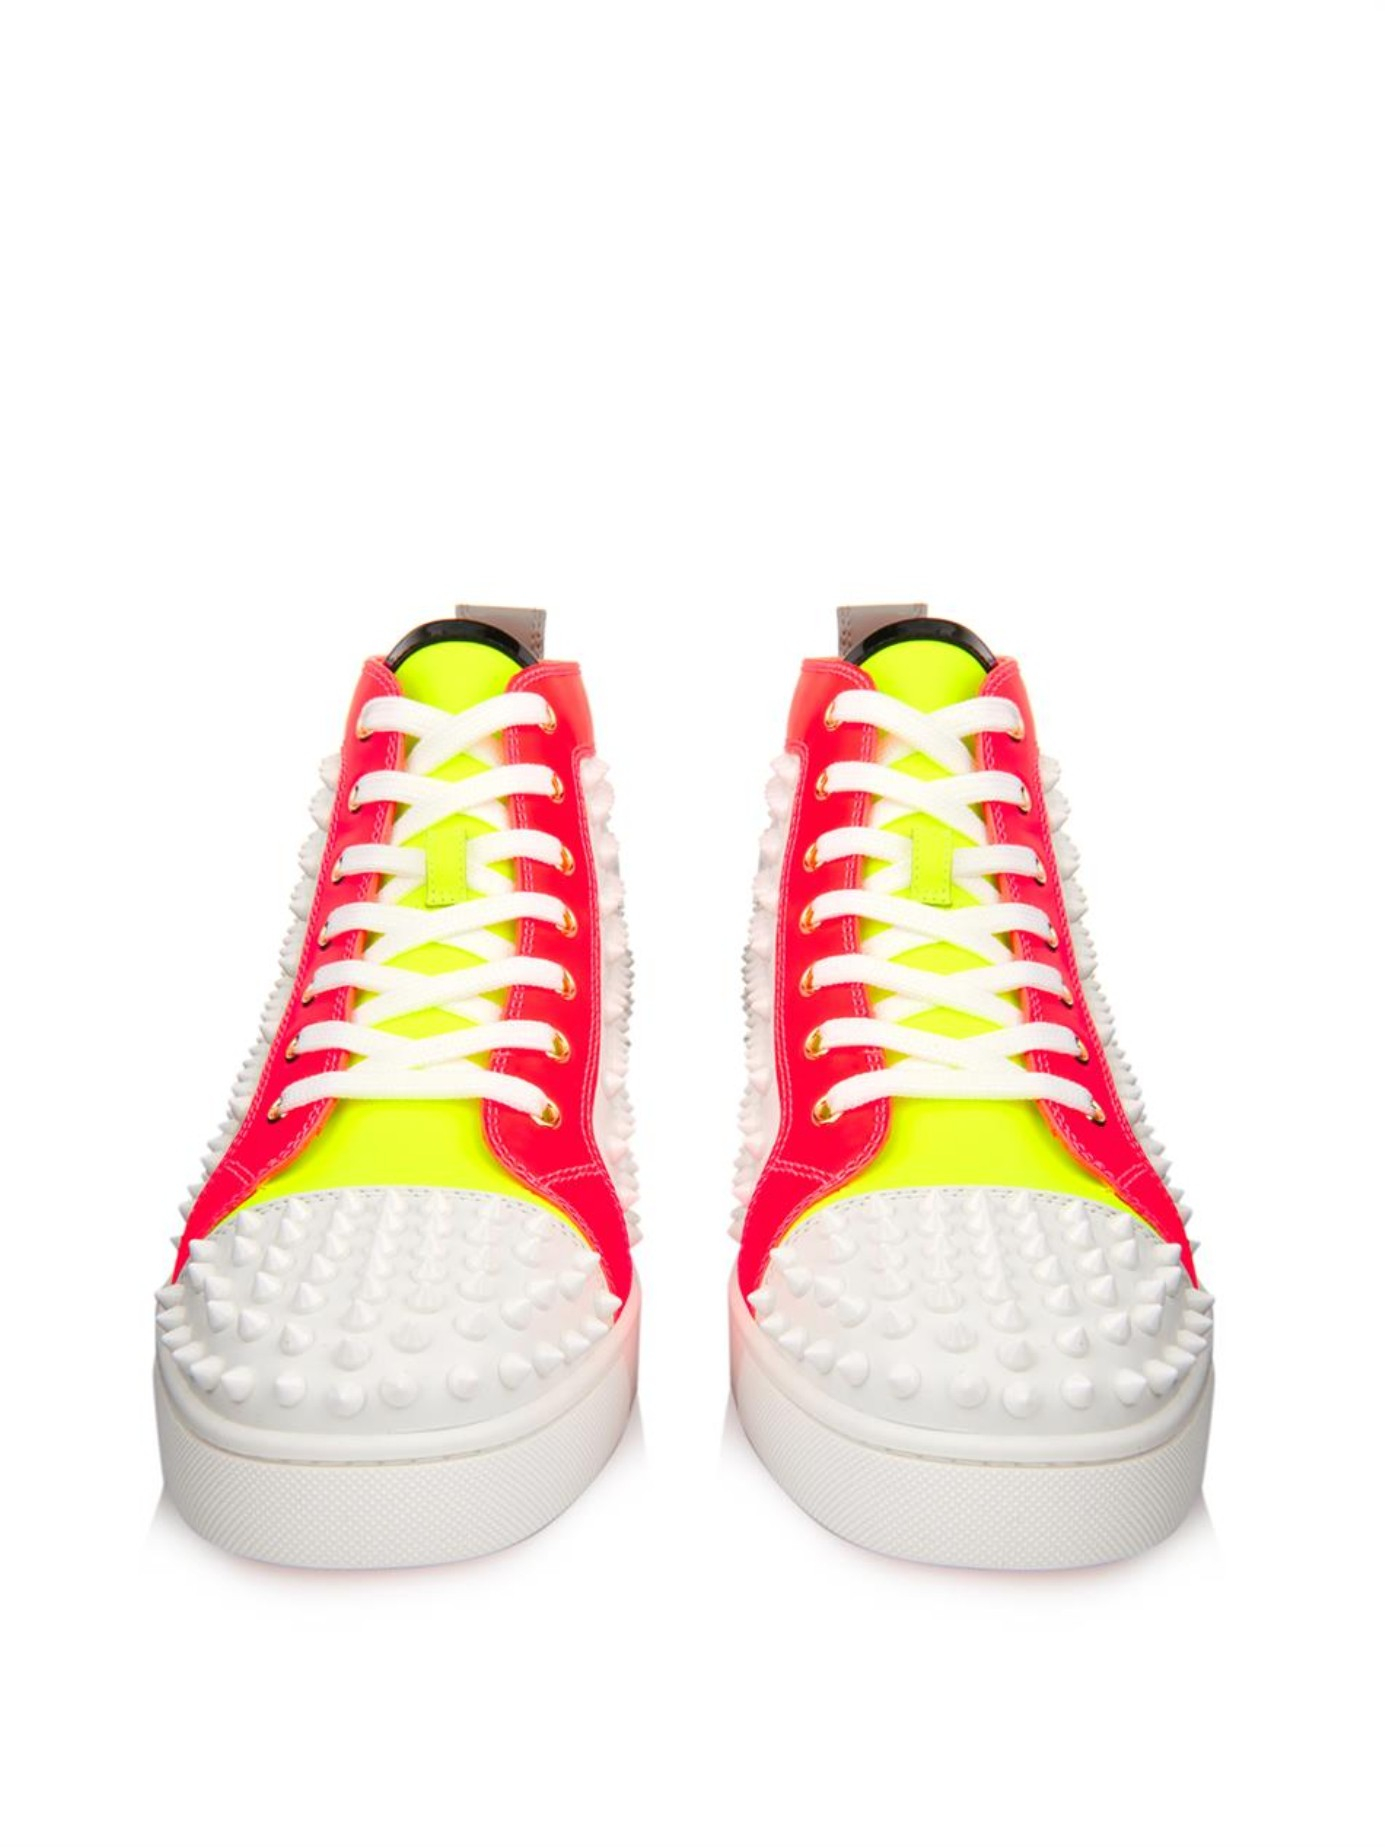 Christian louboutin Louis Spikes Leather High-Top Trainers in Red ...  